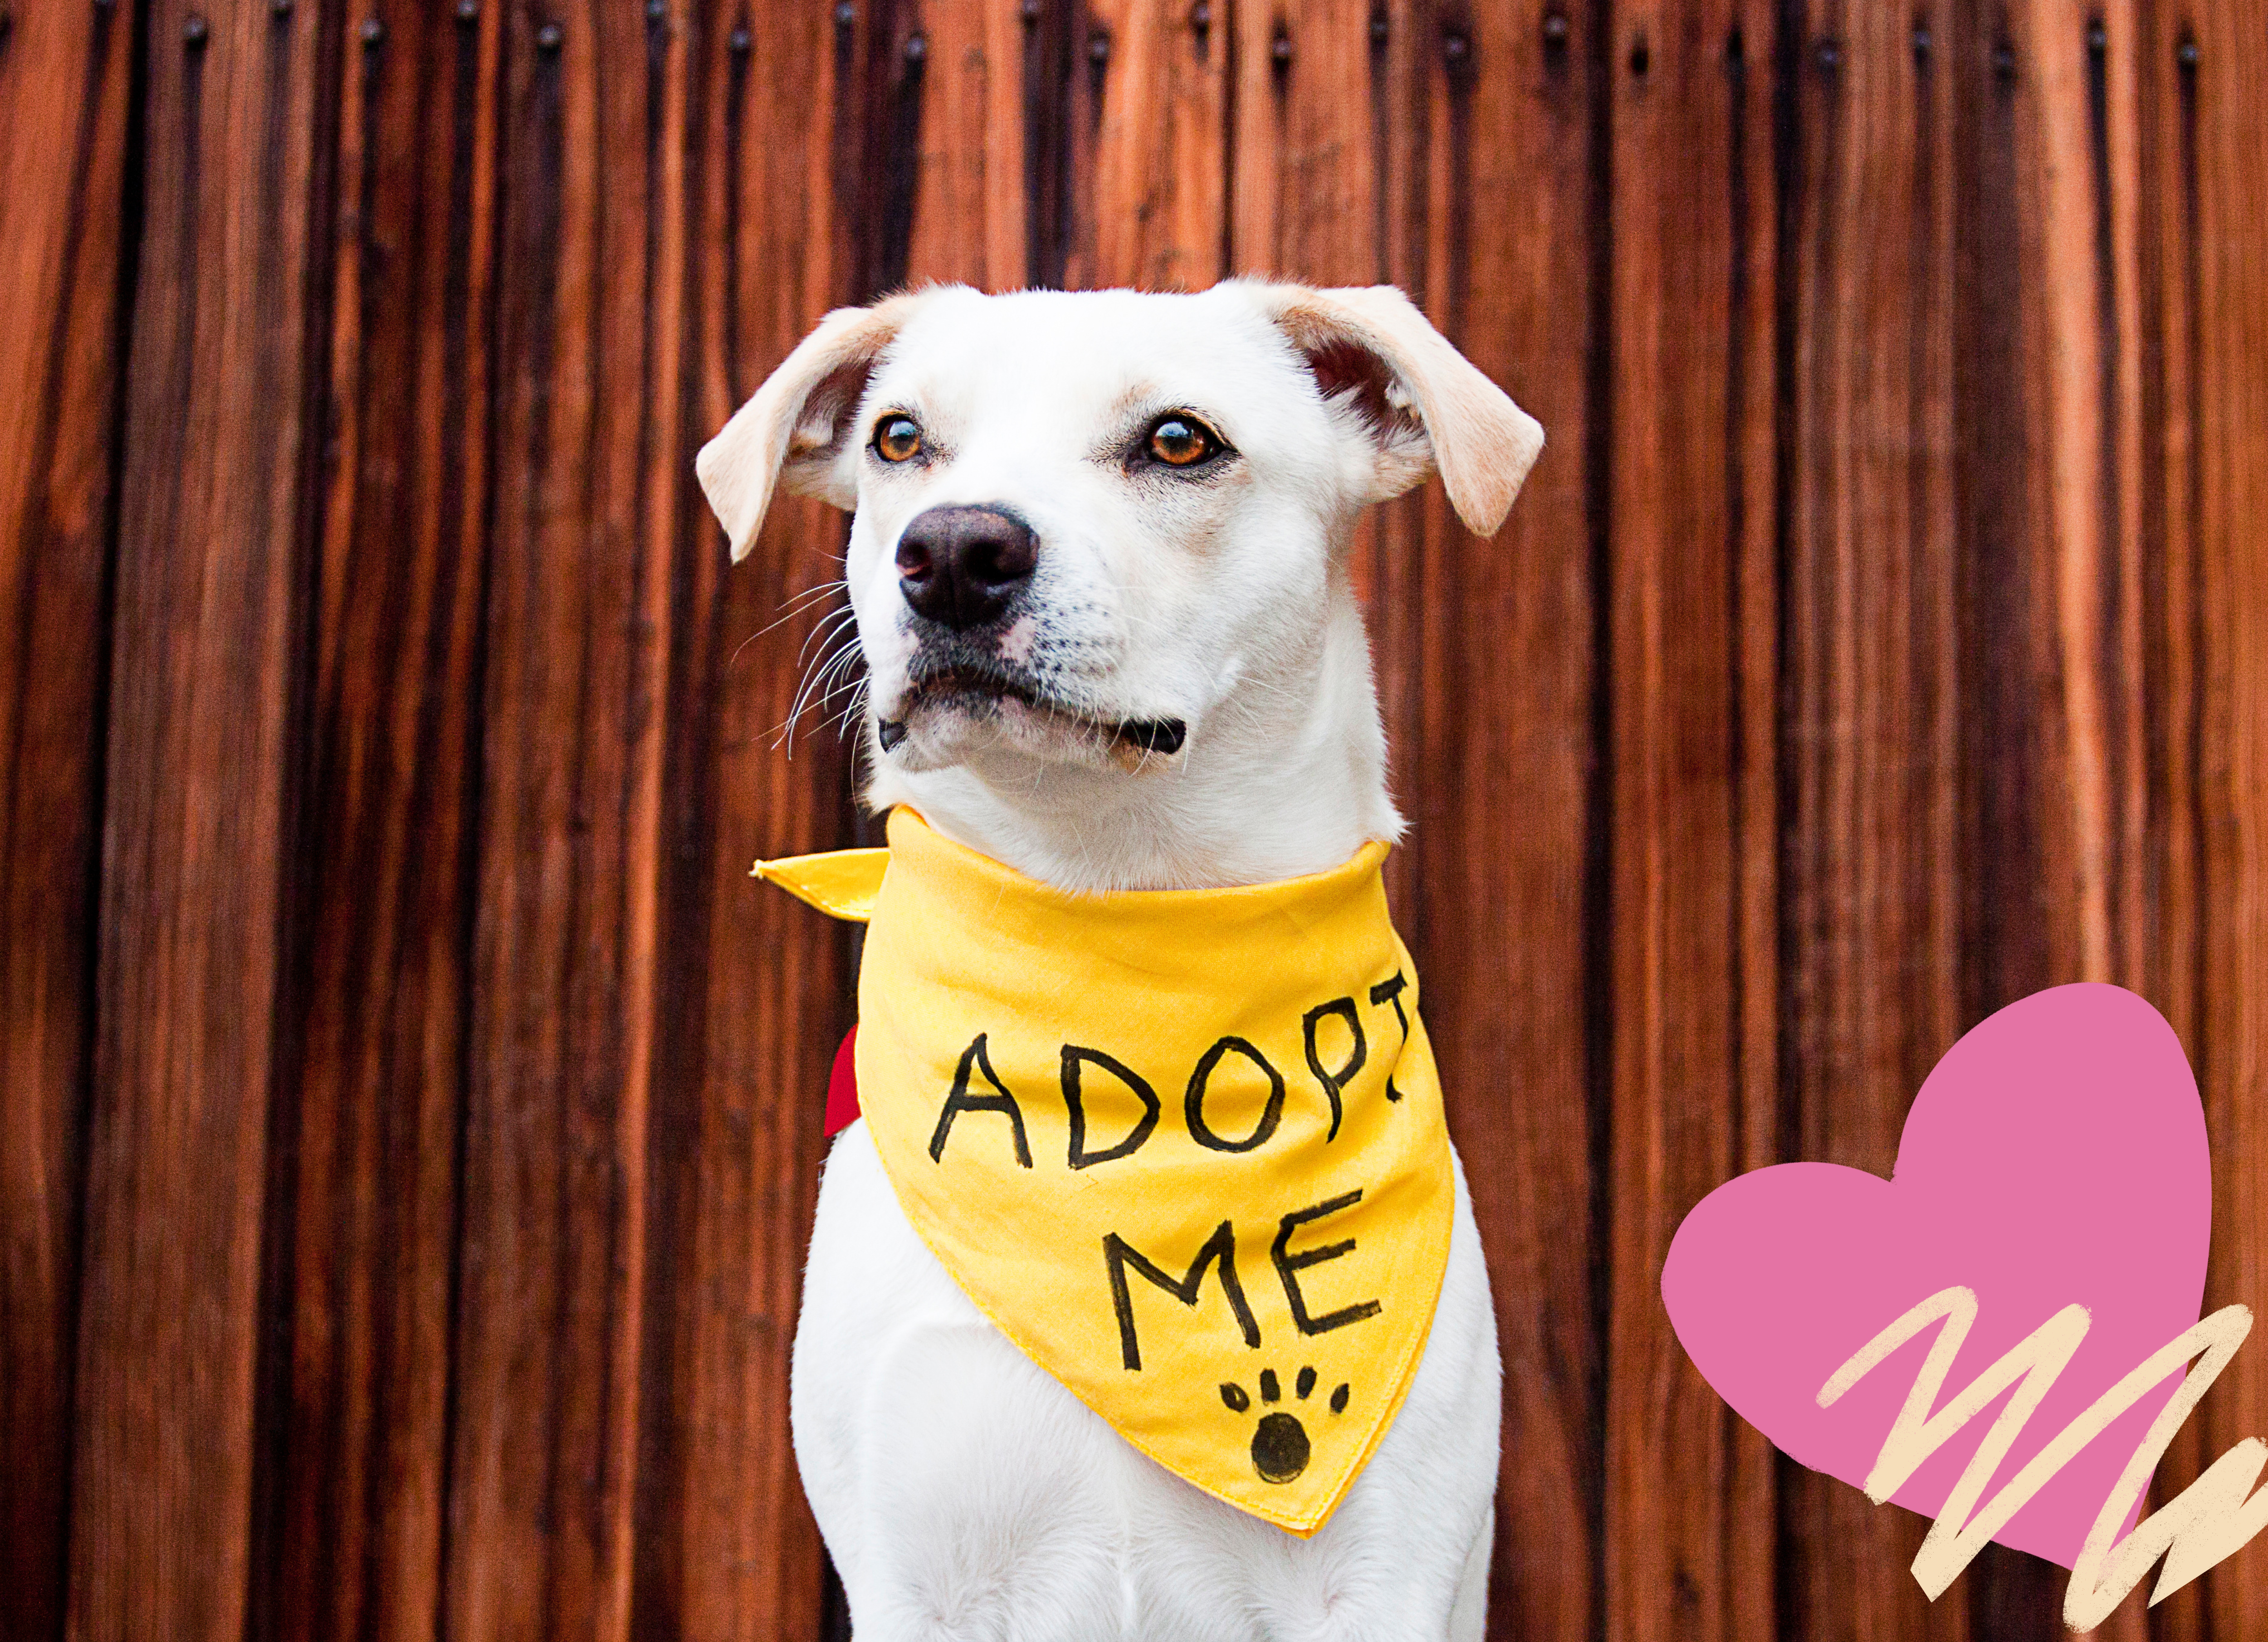 How To Prepare When Adopting a New Rescue Dog